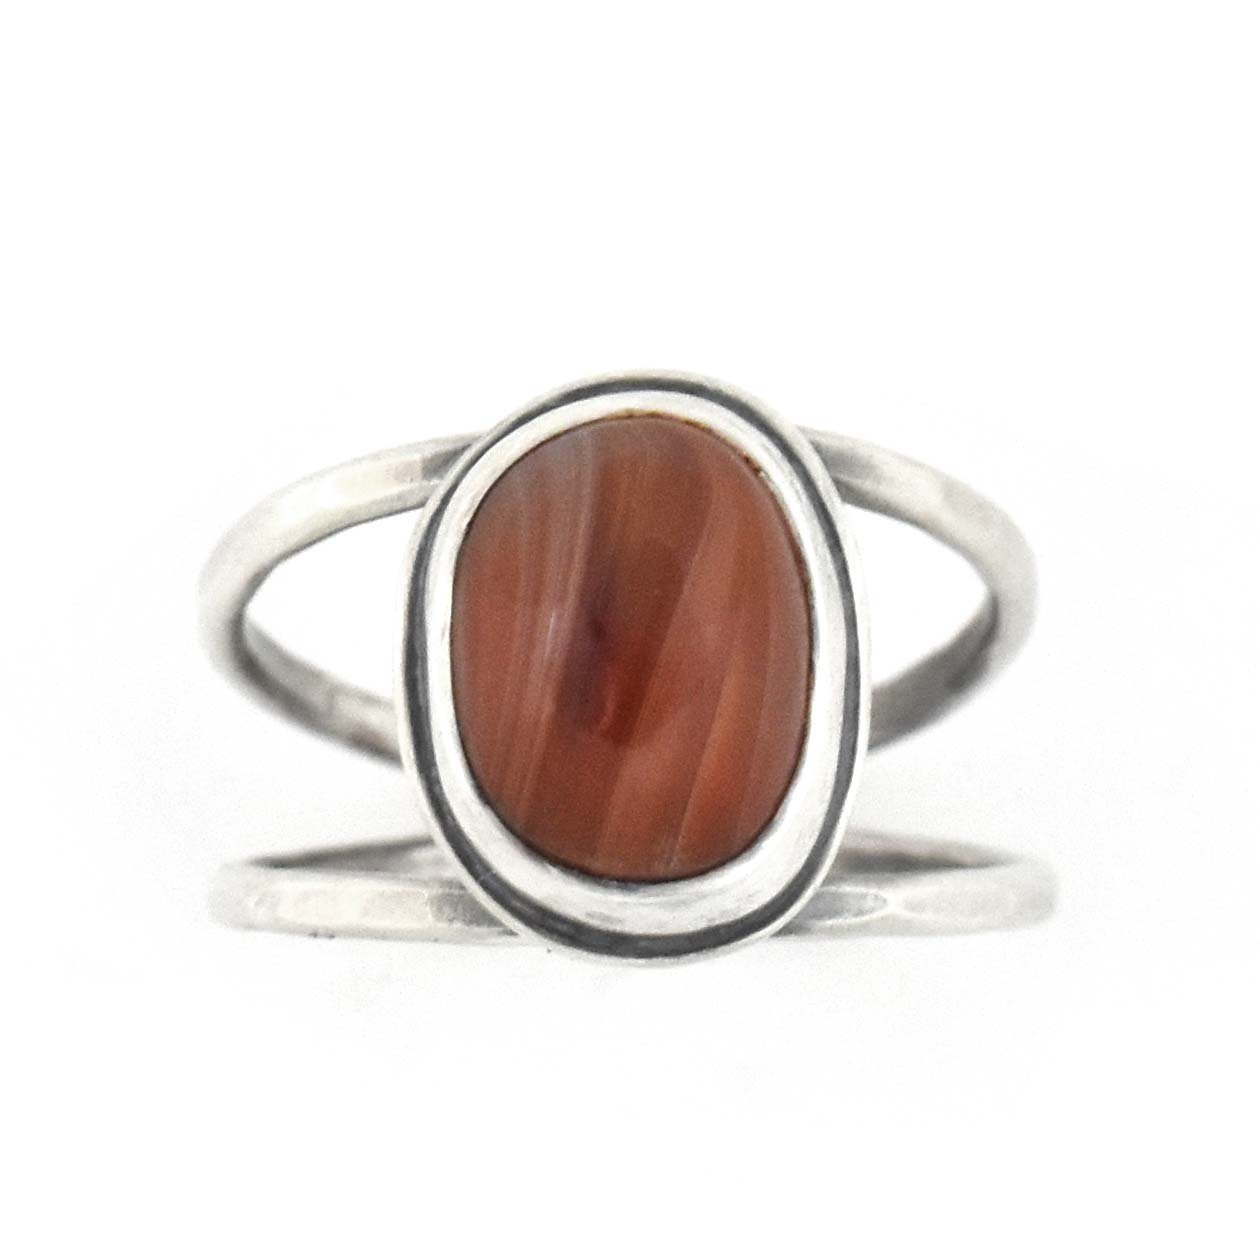 Lake Superior Agate Ring - Size 8.75 - Ring   5694 - handmade by Beth Millner Jewelry